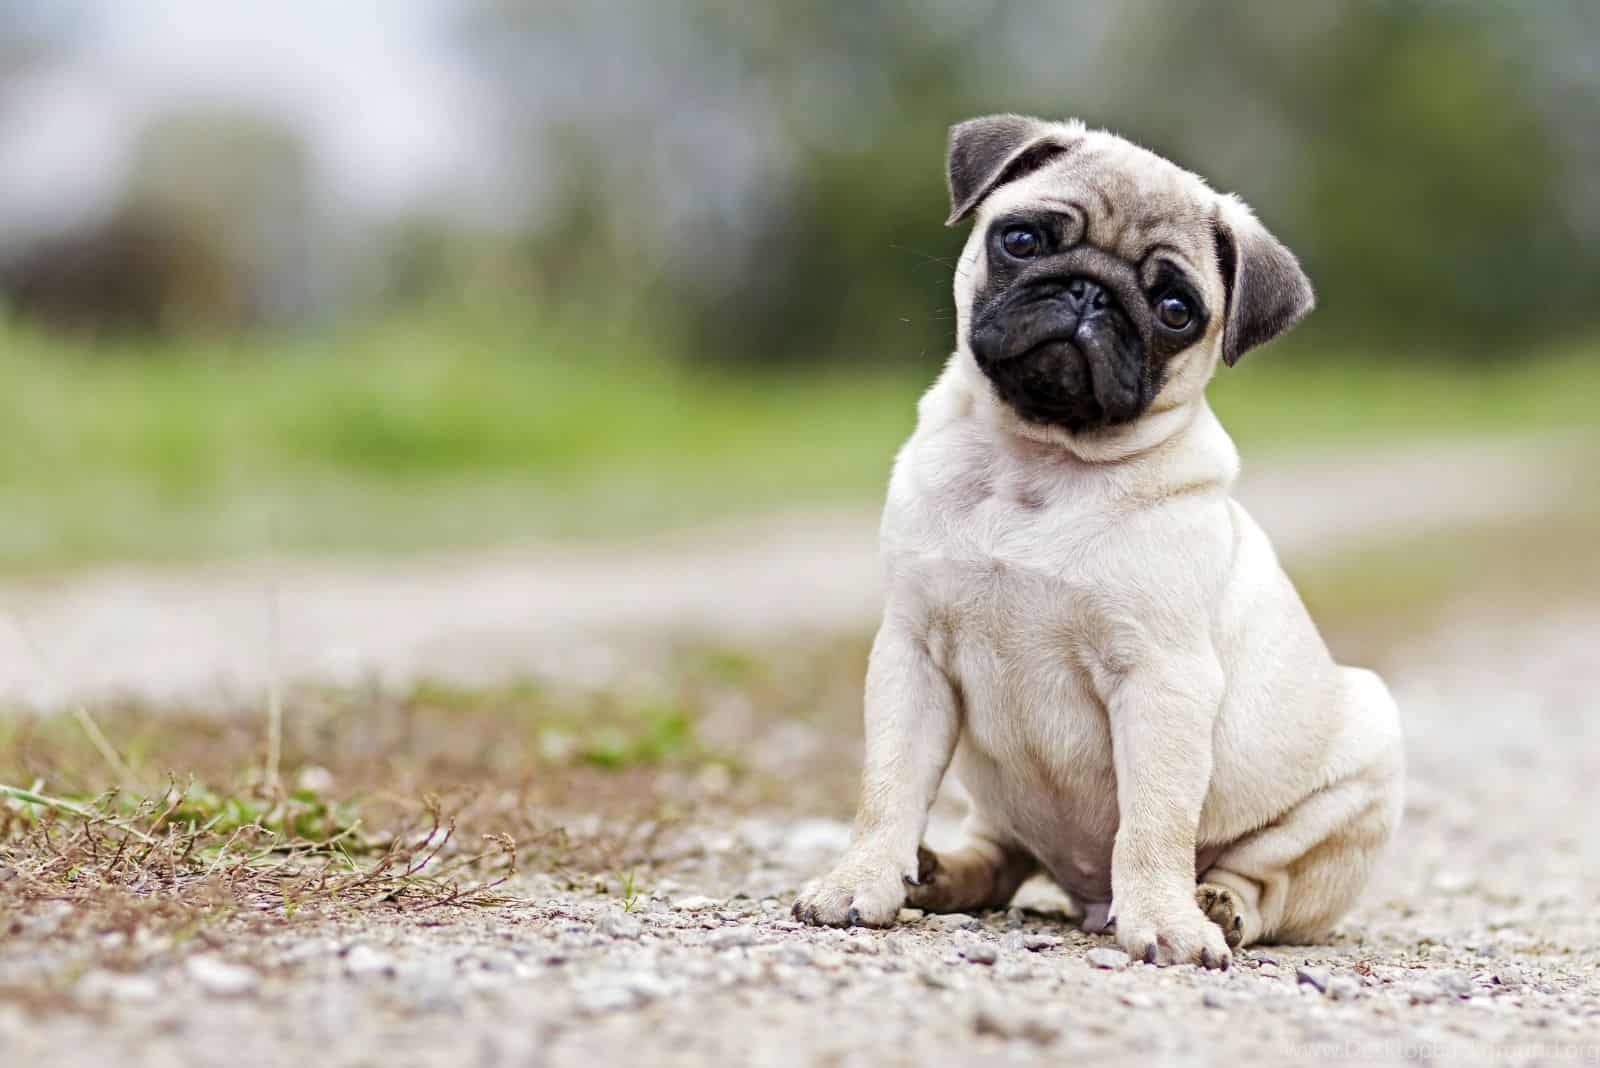 Pug puppy in the park